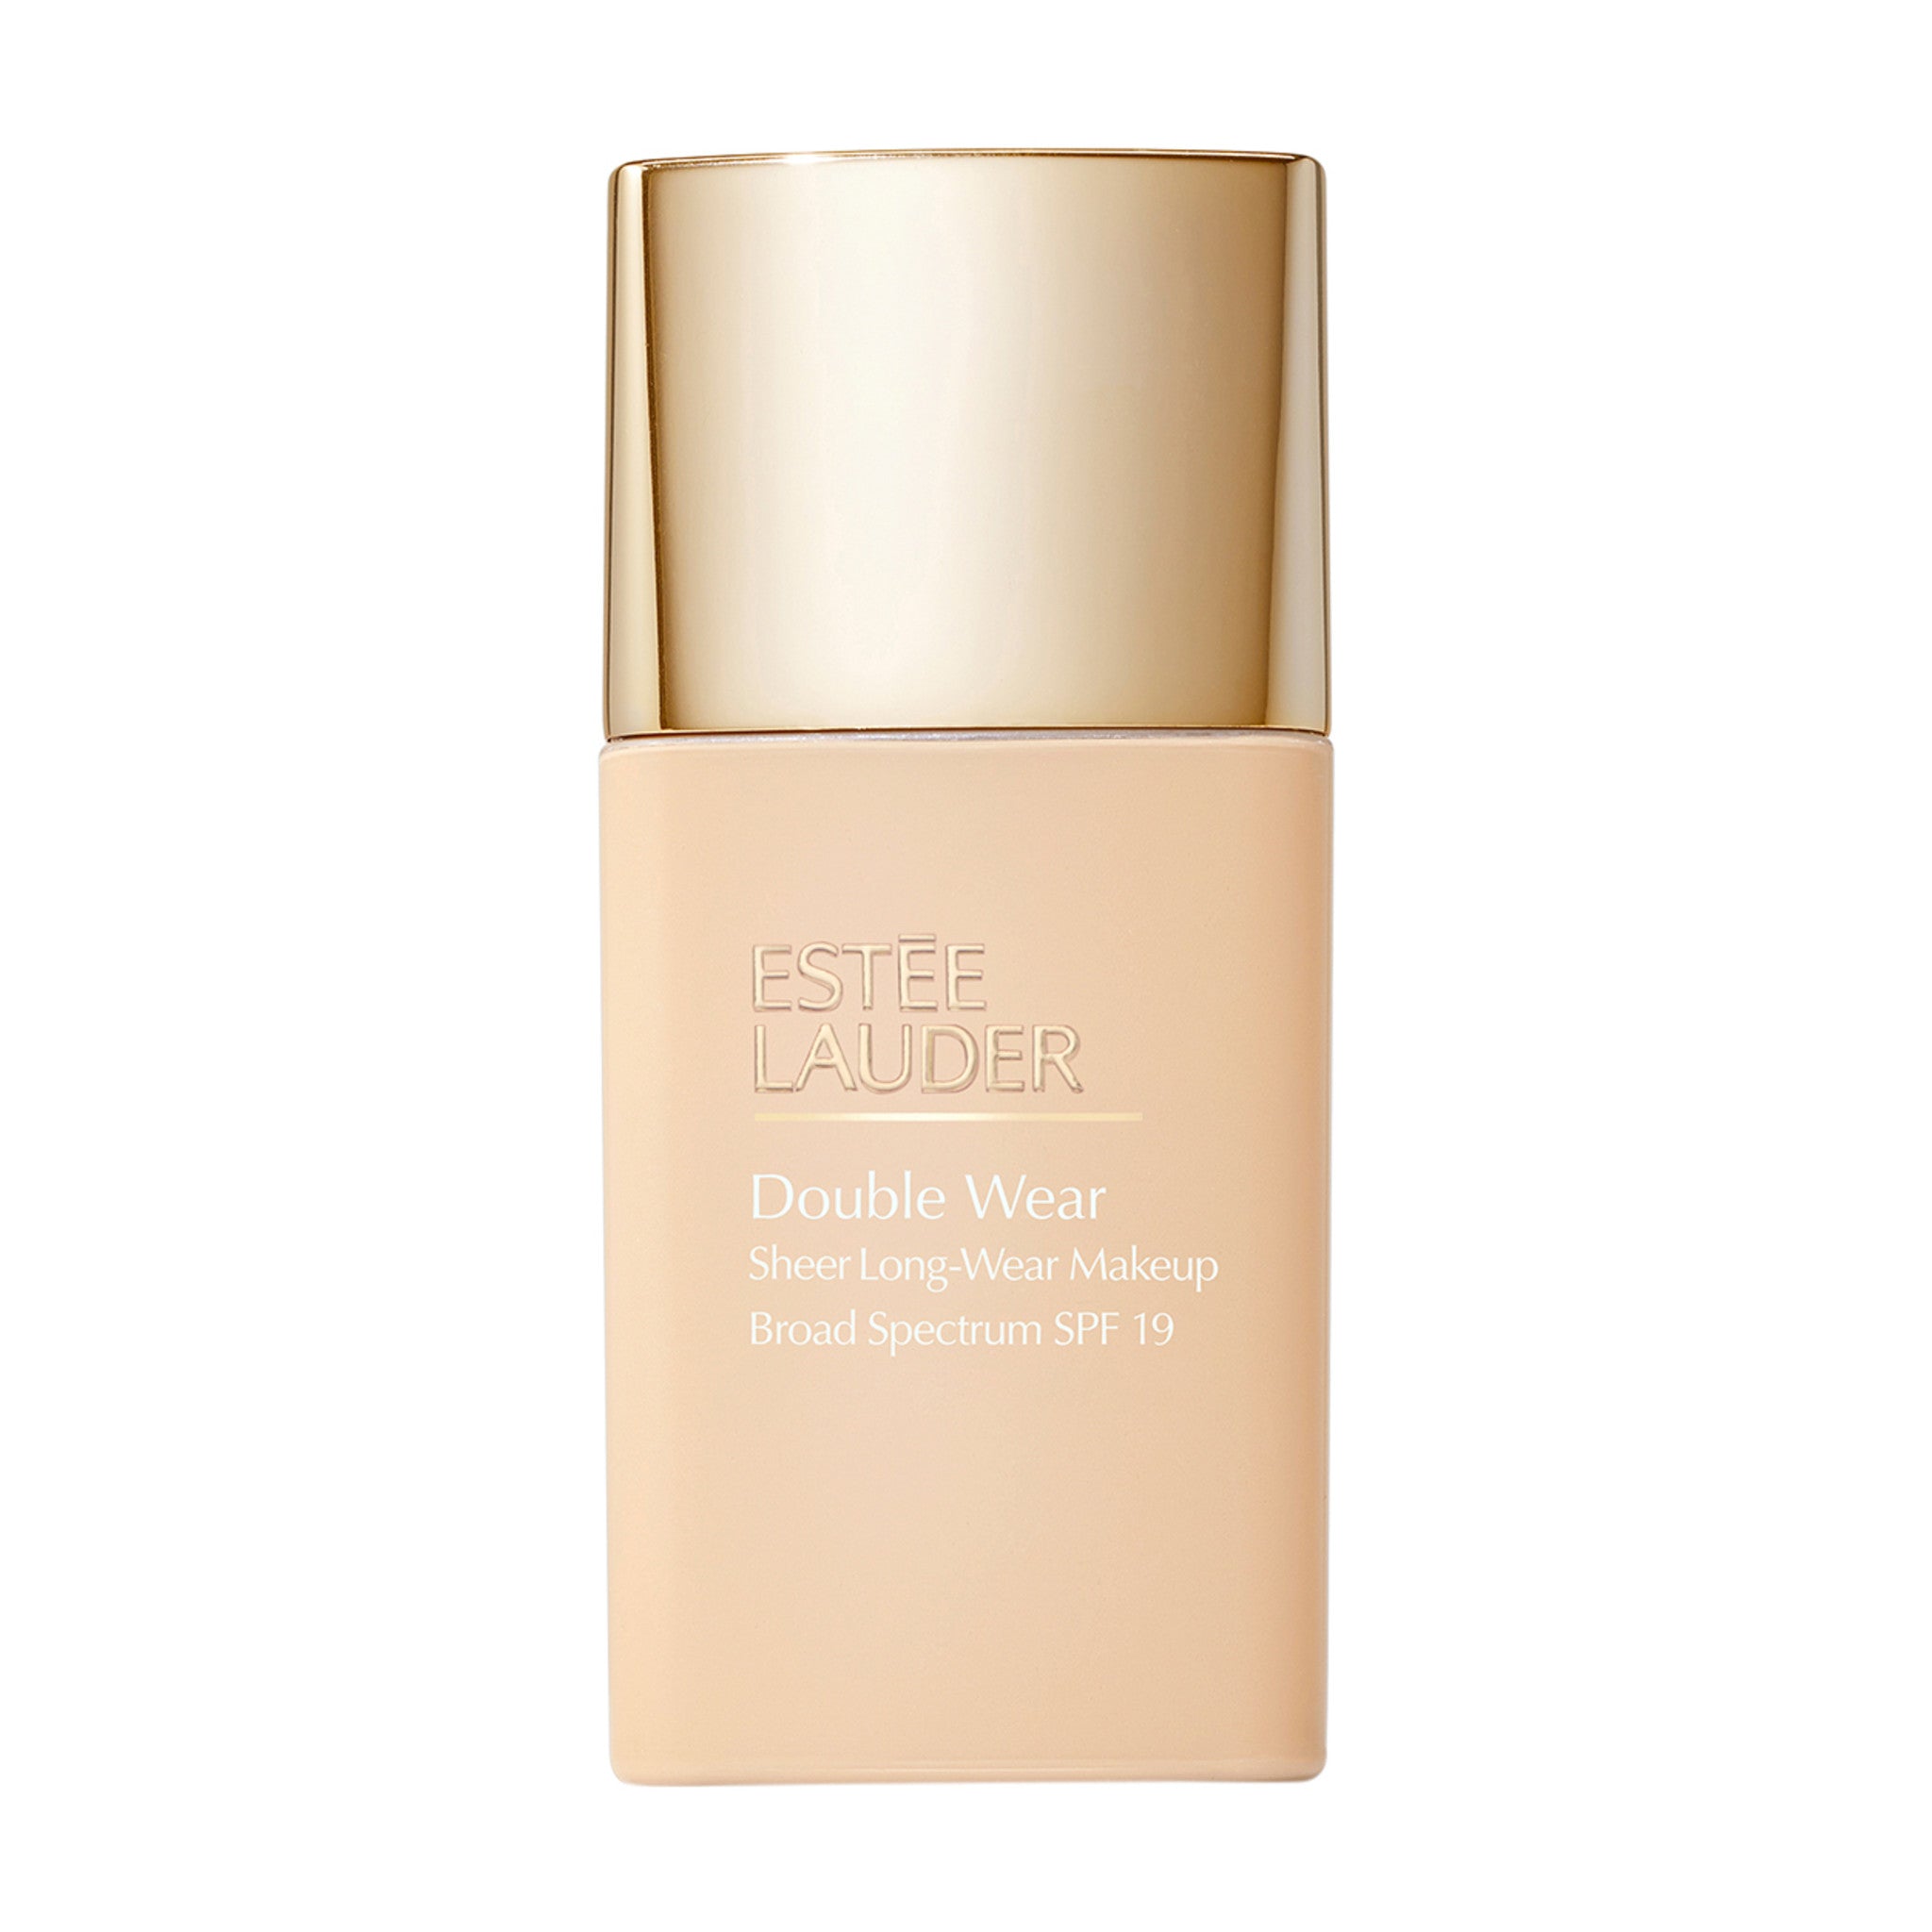 Estée Lauder Double Wear Sheer Long-Wear Foundation Color/Shade variant: 1N1 Ivory Nude main image. This product is for light neutral peach complexions